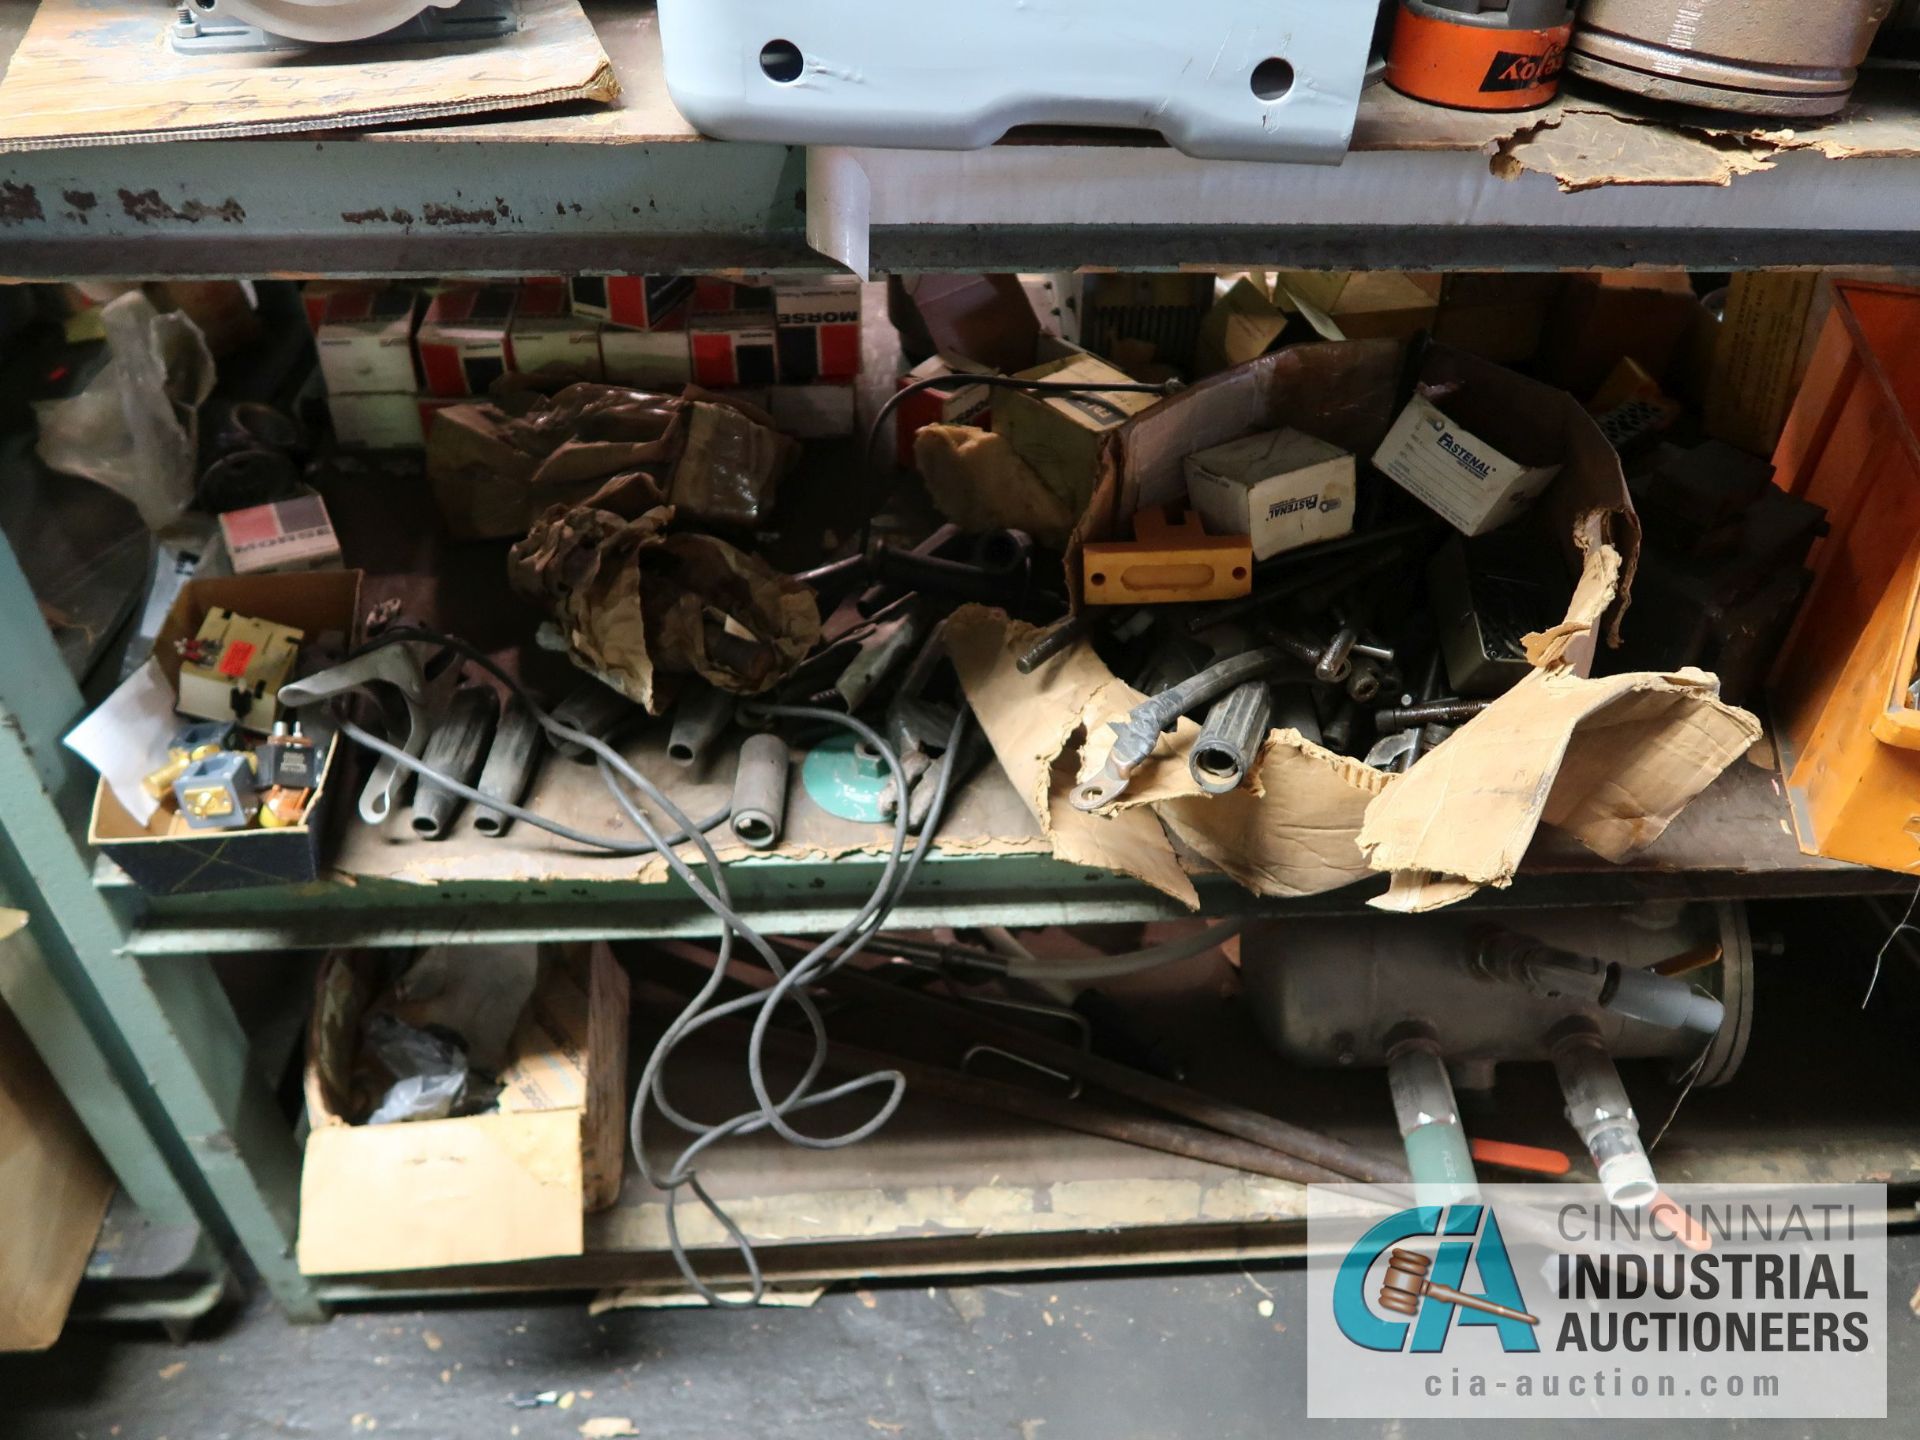 (LOT) MACHINE PARTS, COMPRESSORS, REDUCERS, GEARS, MOTORS, AND OTHER (4) SECTIONS RACK - Image 8 of 28